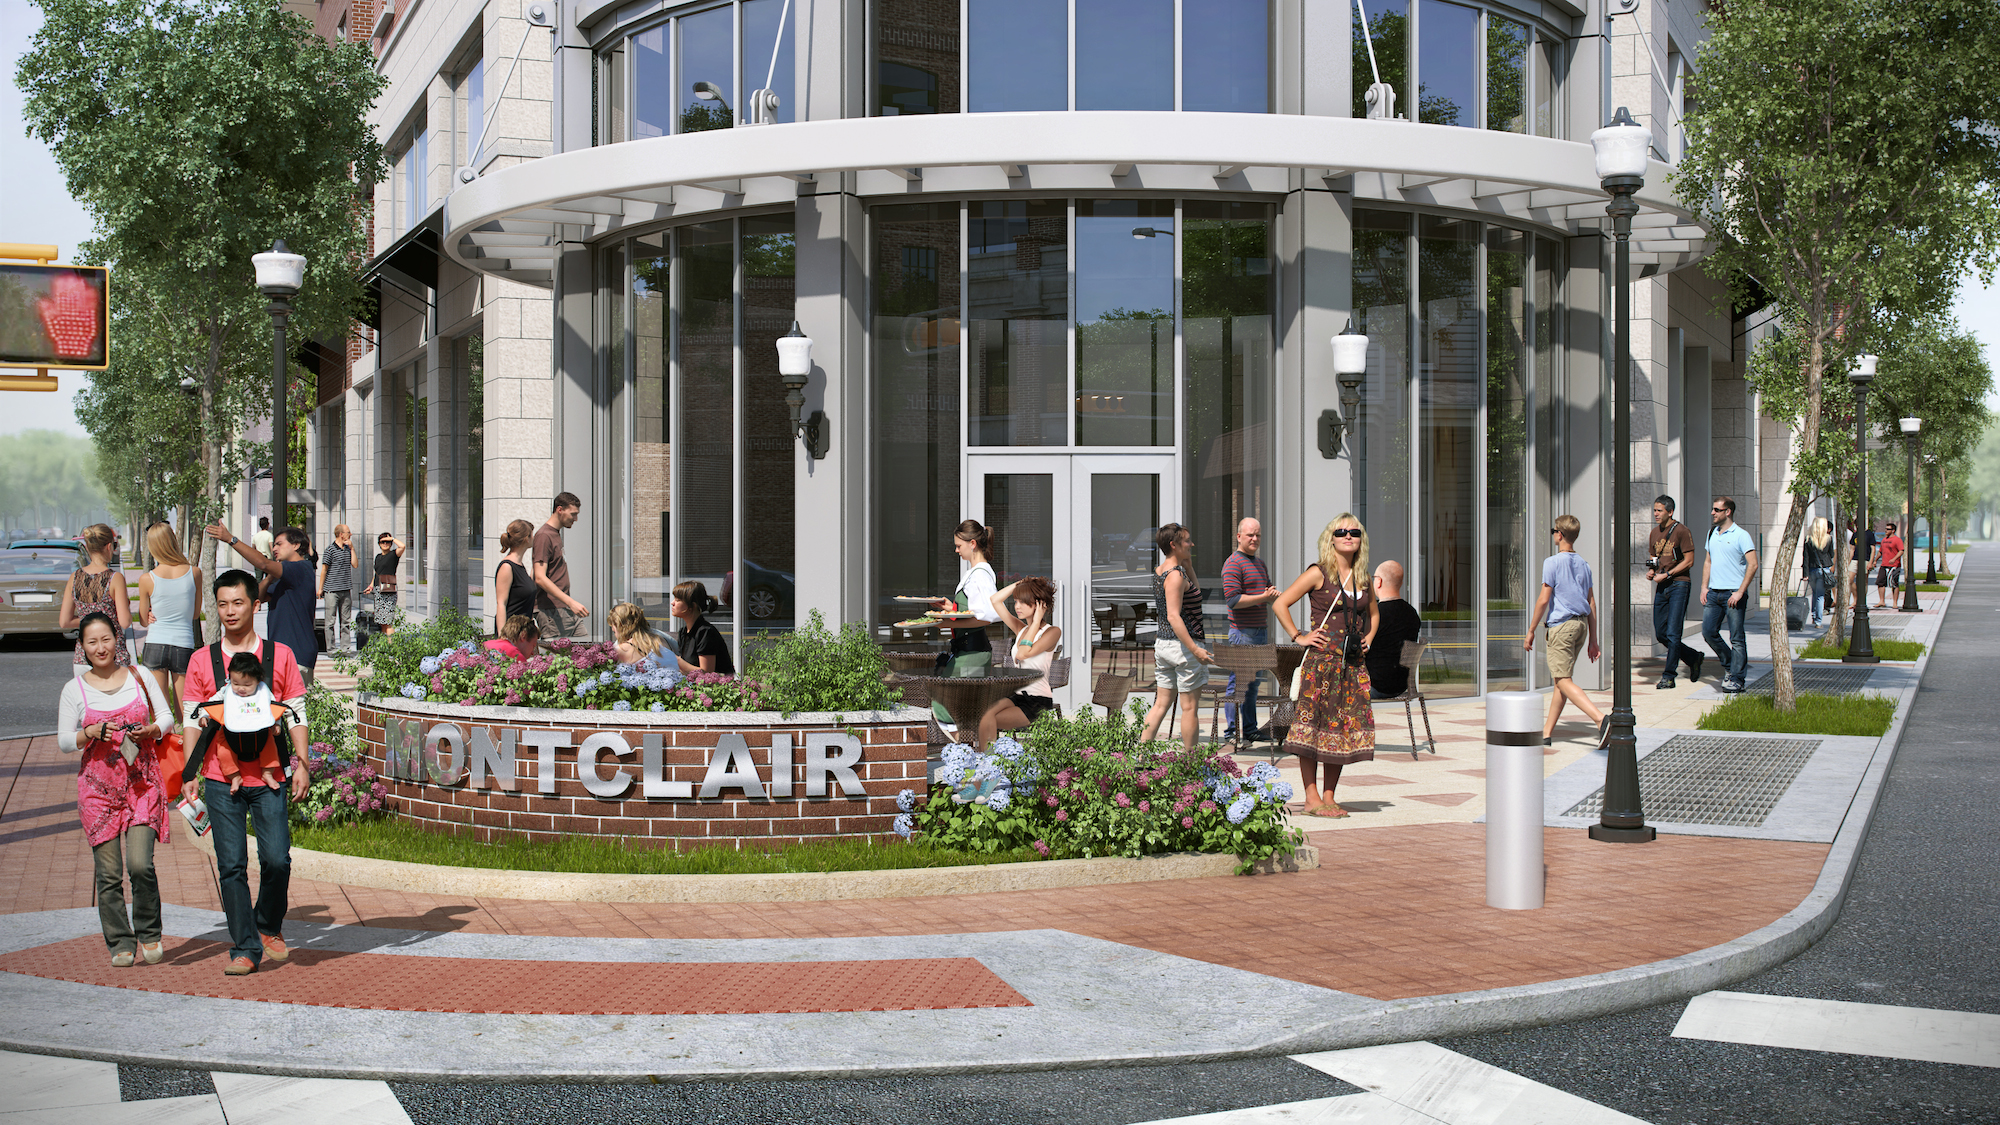 An outdoor plaza connected to a two-story round atrium with 30-foot-high glass walls will be open year-round to the public.